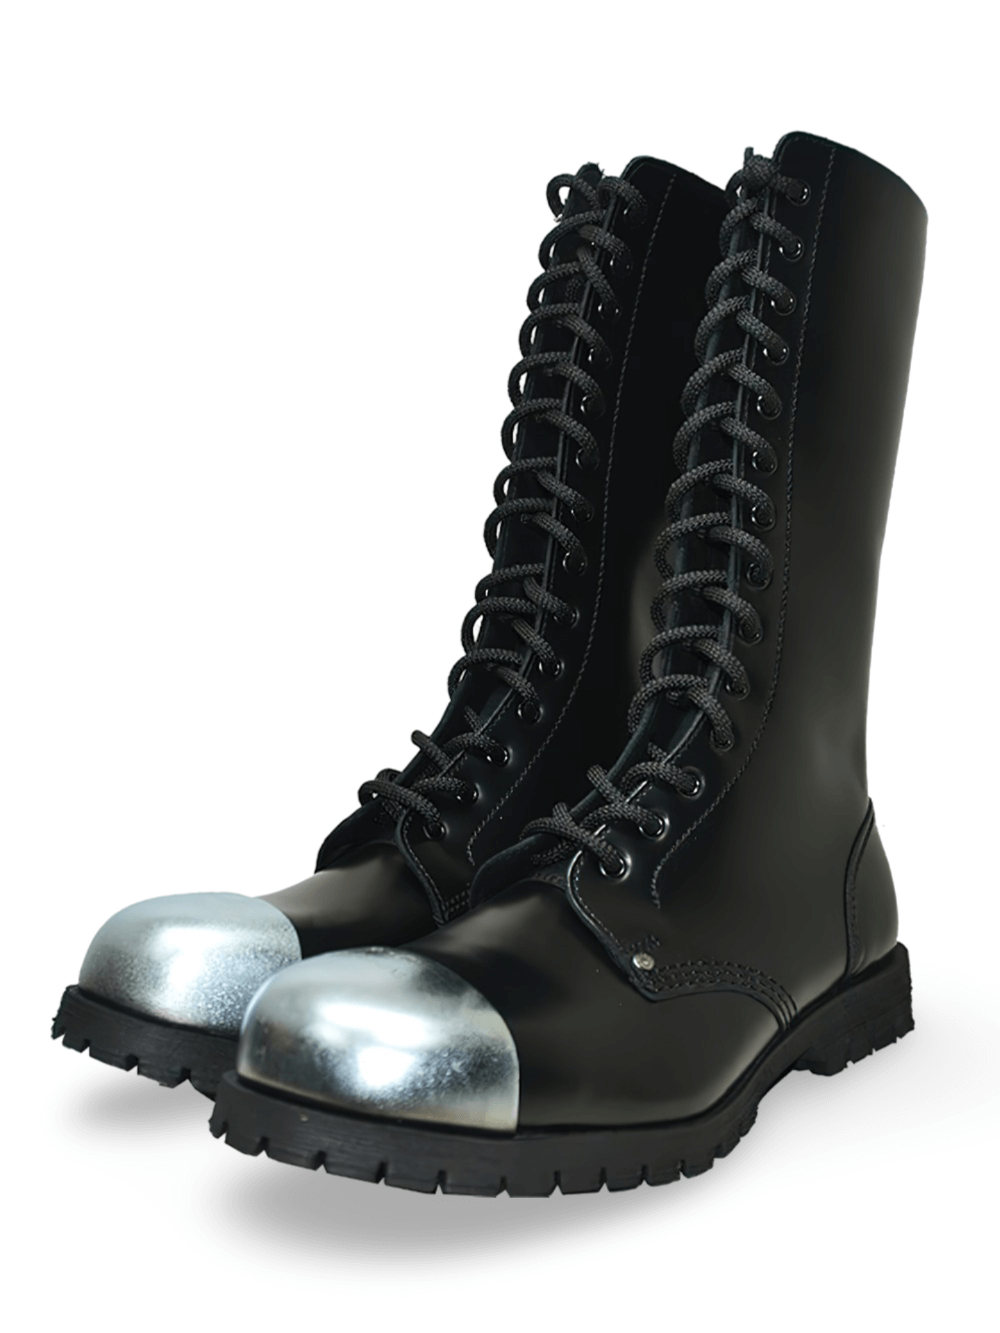 Black 14 Eyelet Lace-up Rangers with Steel Toe